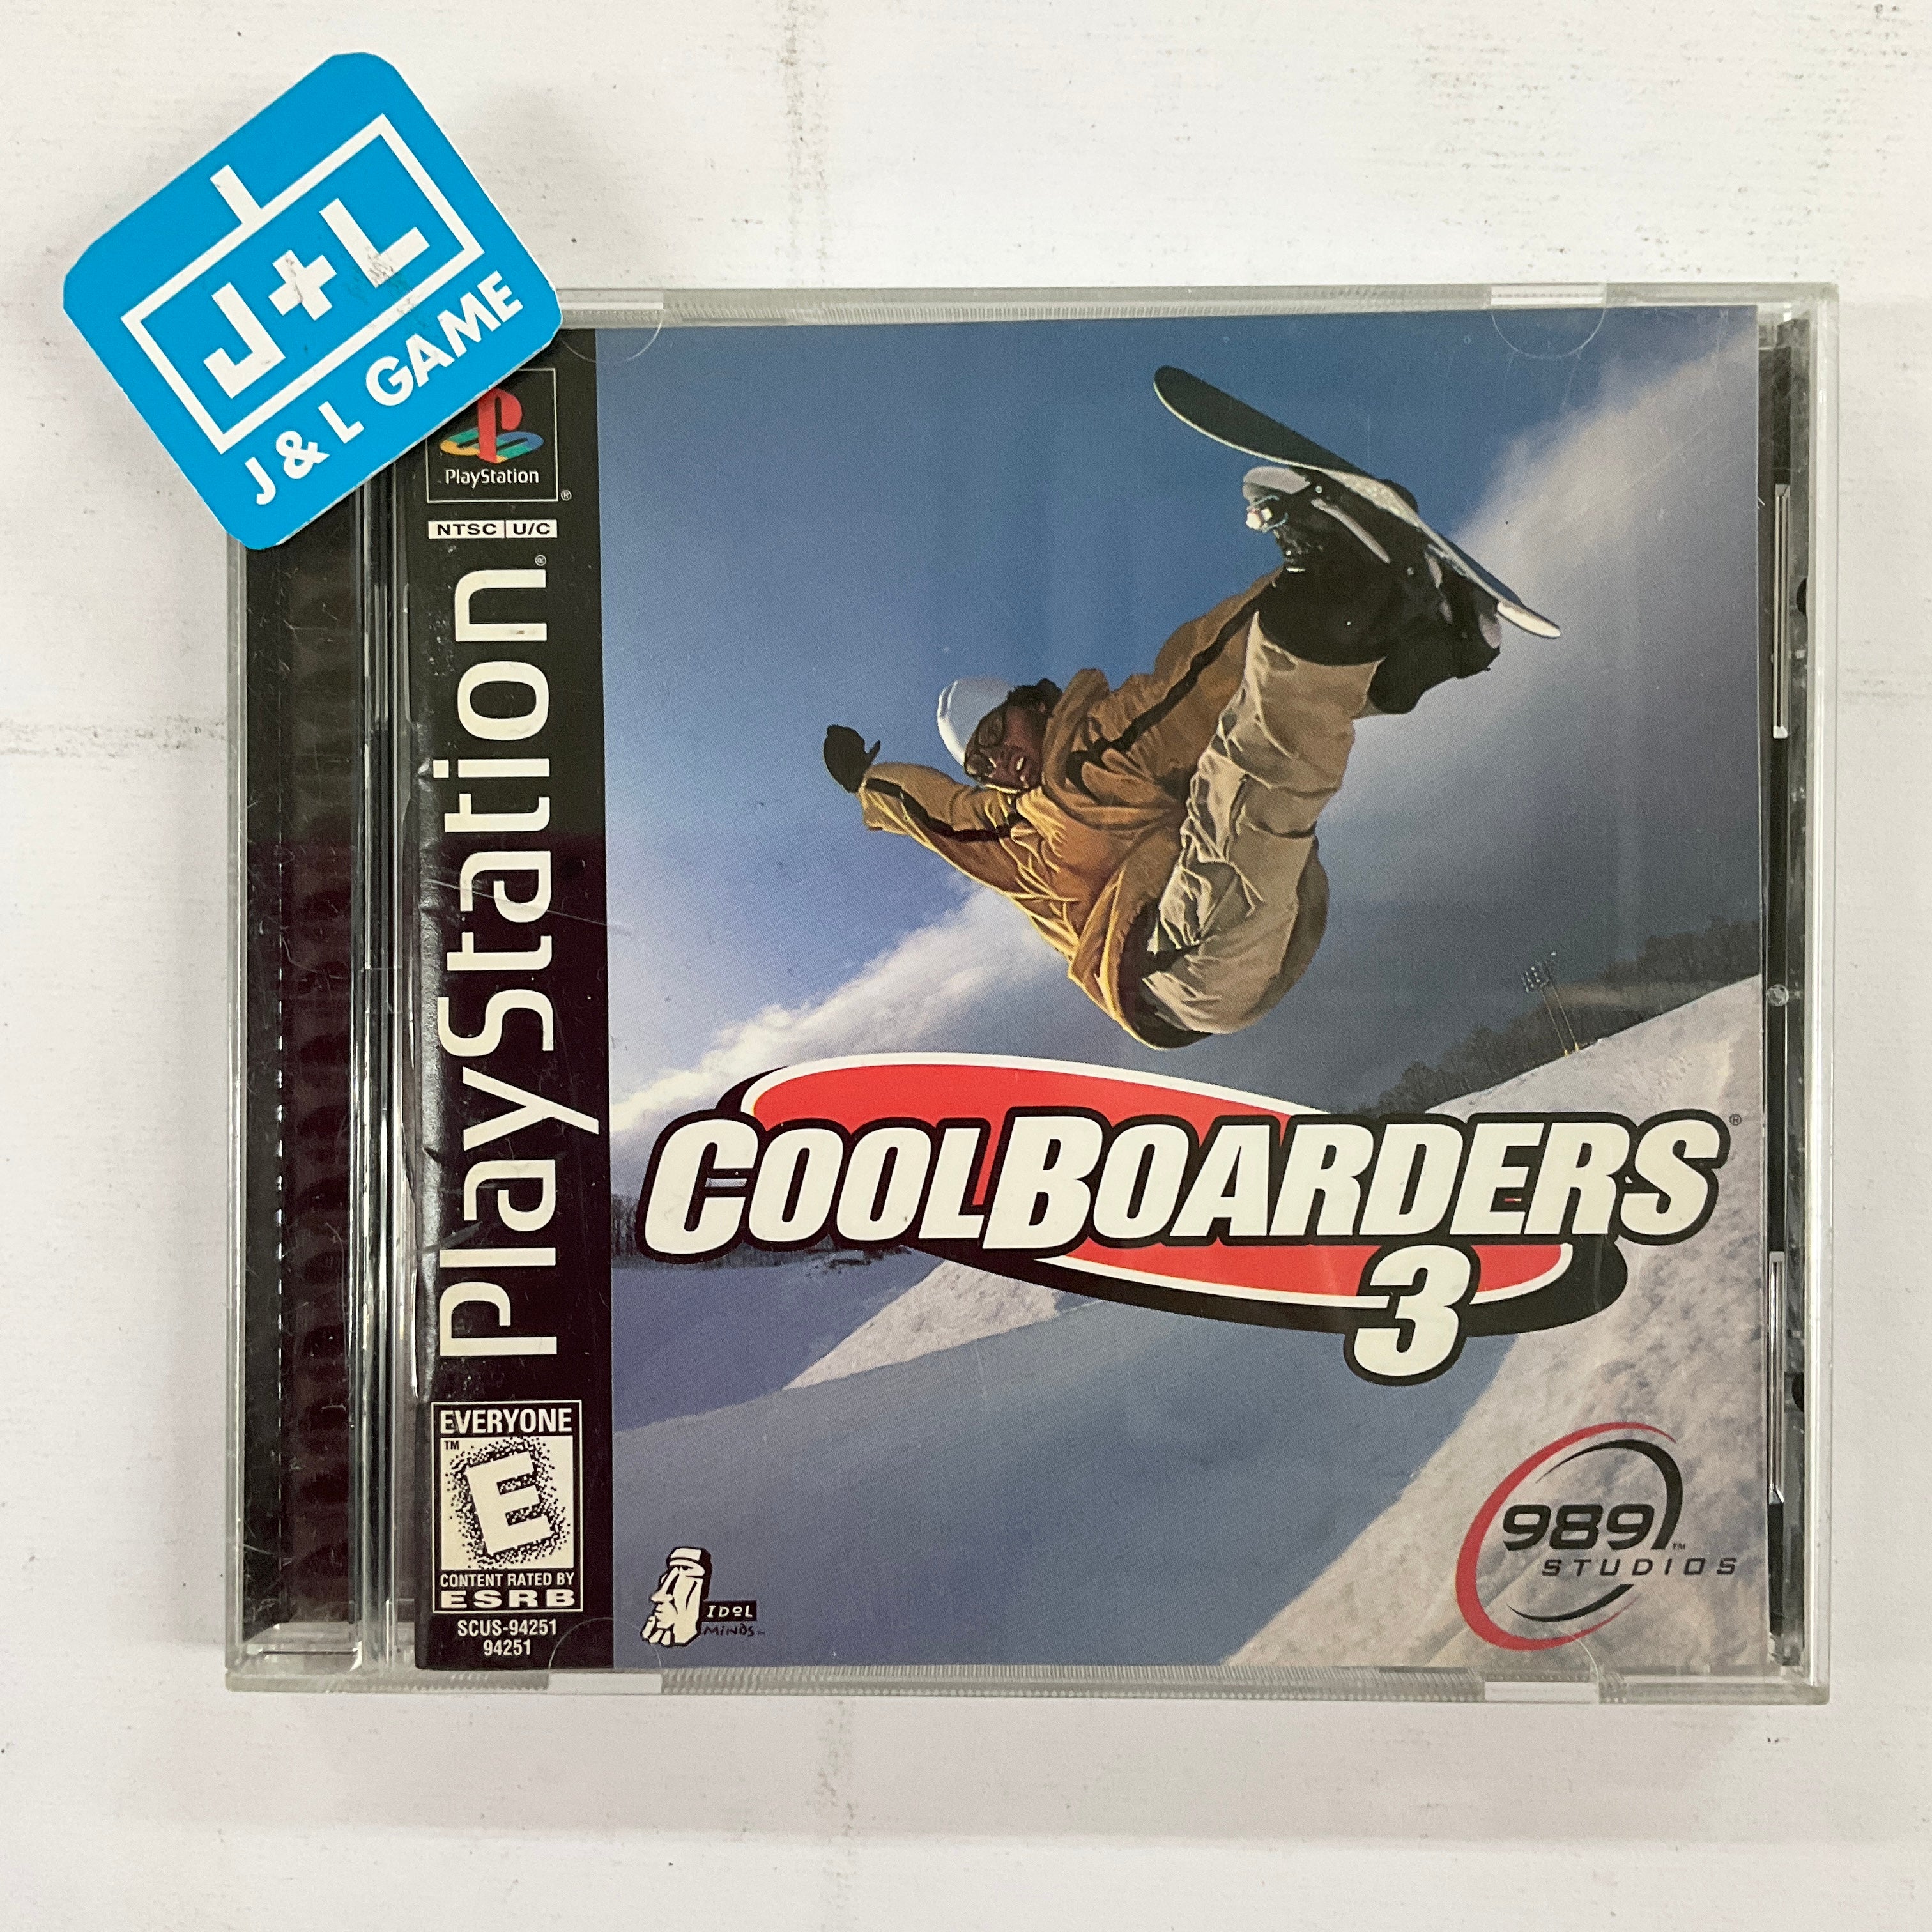 Cool Boarders 3 - (PS1) PlayStation 1 [Pre-Owned] Video Games 989 Studios   